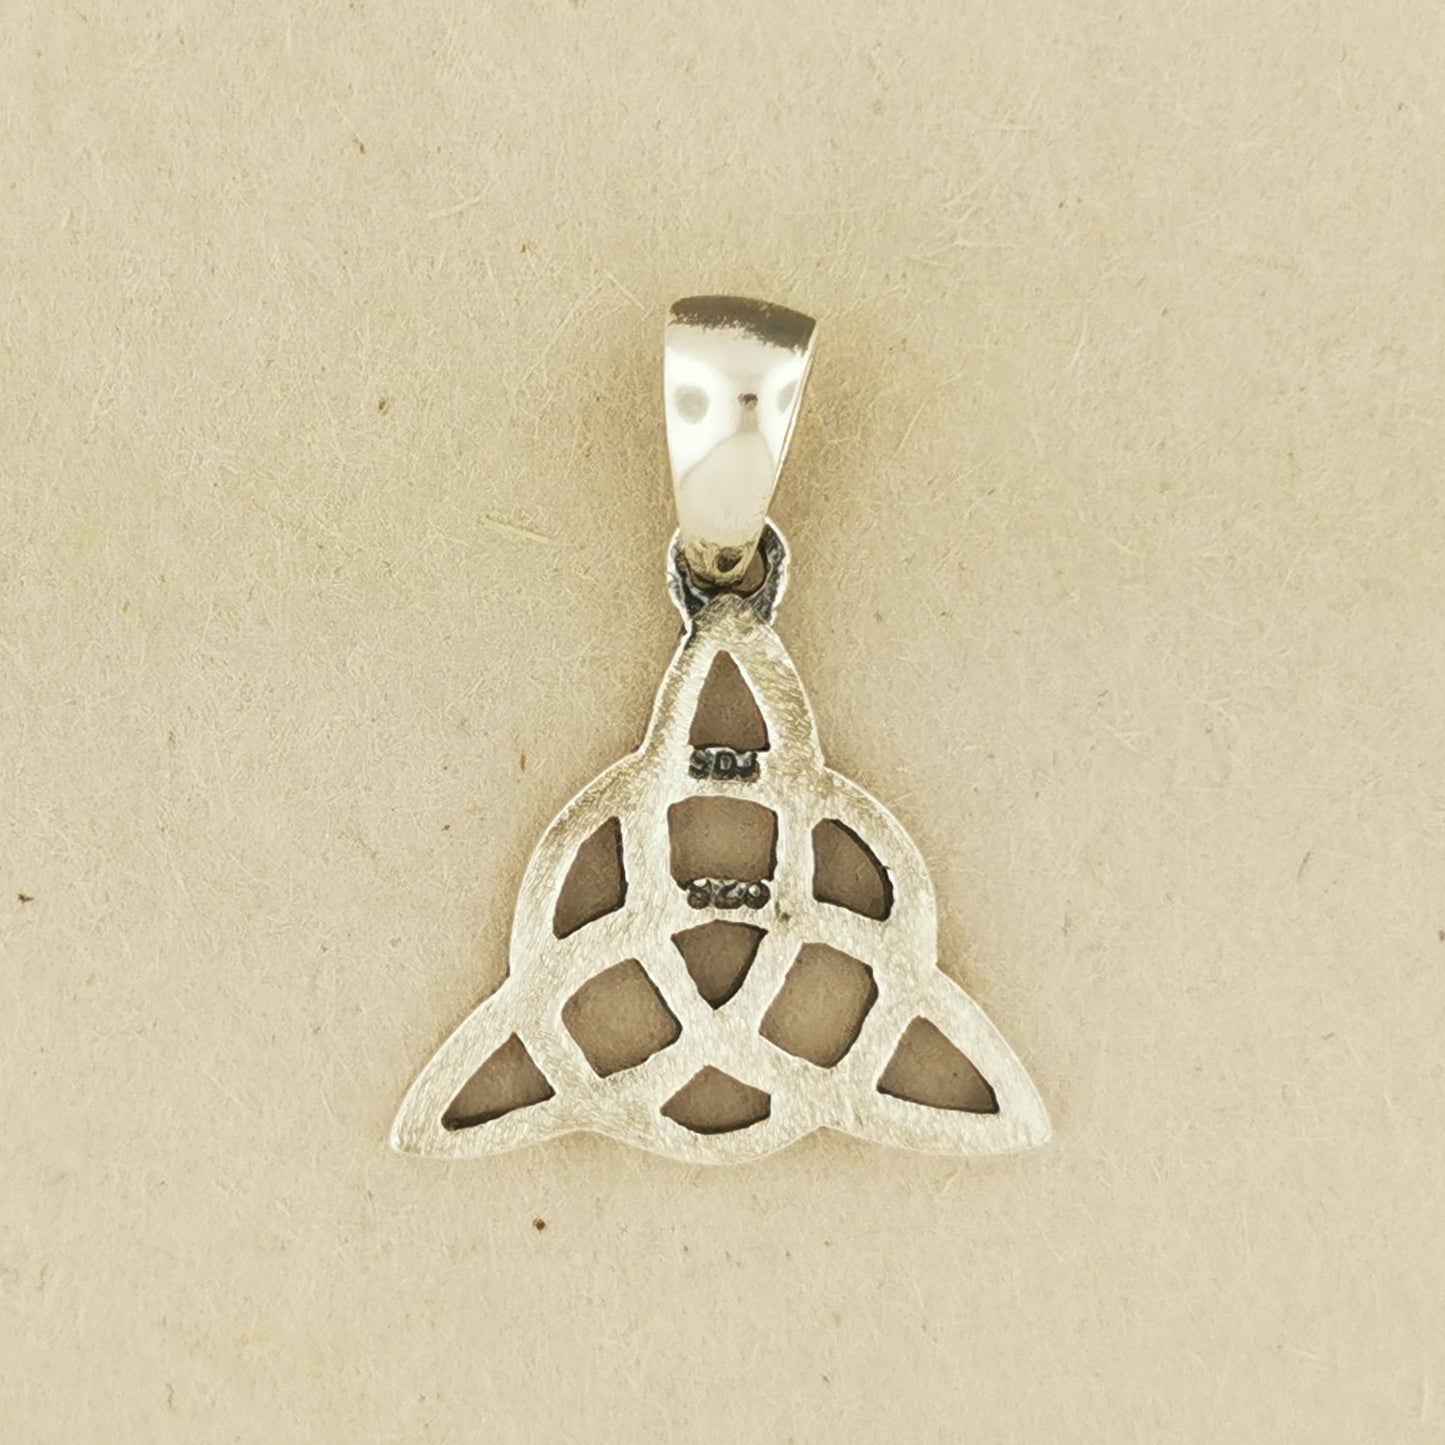 Small Triquetra Pendant in Sterling Silver, Triquetra Symbol Pendant, Sterling Silver Triquetra, Silver Triquetra Pendant, Charmed Movie Pendant, Silver Celtic Pendant, Trinity Knot Charm, Endless Knot Pendant, Irish Celtic Pendant, Silver Trinity Pendant, Silver Celtic Jewelry, Silver Celtic Jewellery